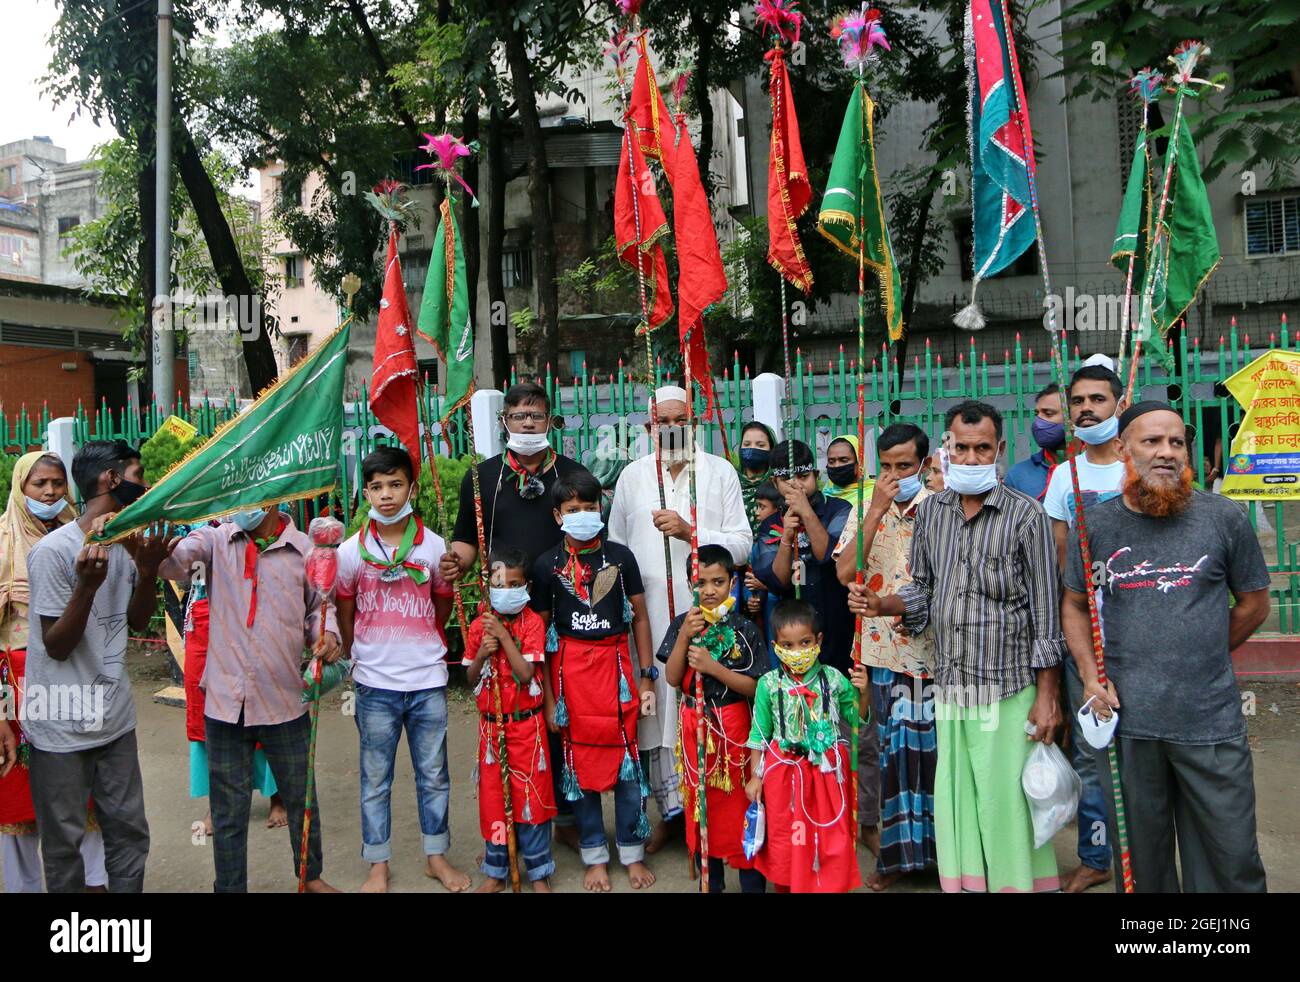 Dhaka, Bangladesh, August 20: shias children  take part   during  the day of mourning to commemorate Ashura Day. The tenth day of Muharram is celebrated as Ashura, Shia muslims celebrate the day as mourning day to recalling the martyrdom of Prophet Hazrat Muhammad's grandson Hazrat Imam Hussain, his relatives and 72 supporters during the clash of Karbala on this day in the Hijri year of 61. Credit: Habibur Rahman / Eyepix Group/Alamy Live News Stock Photo